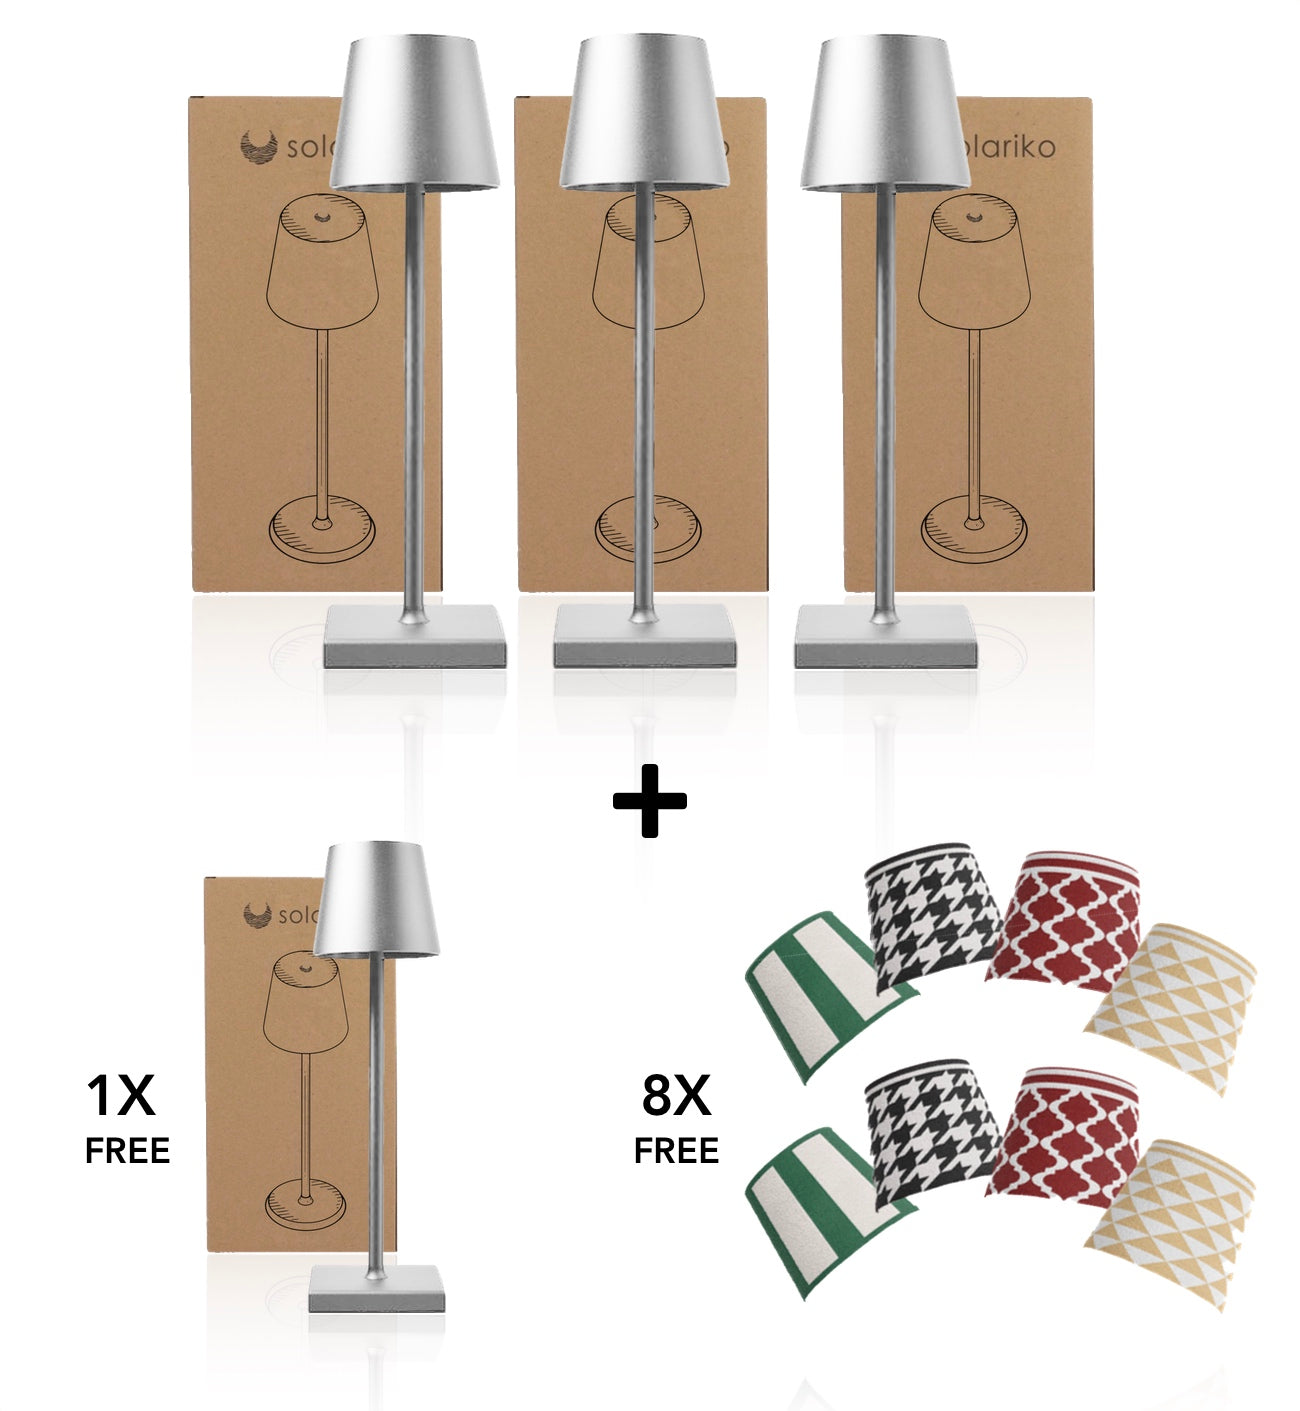 3 Lamps + 1 FREE Lamp + 8 FREE FunCovers ™